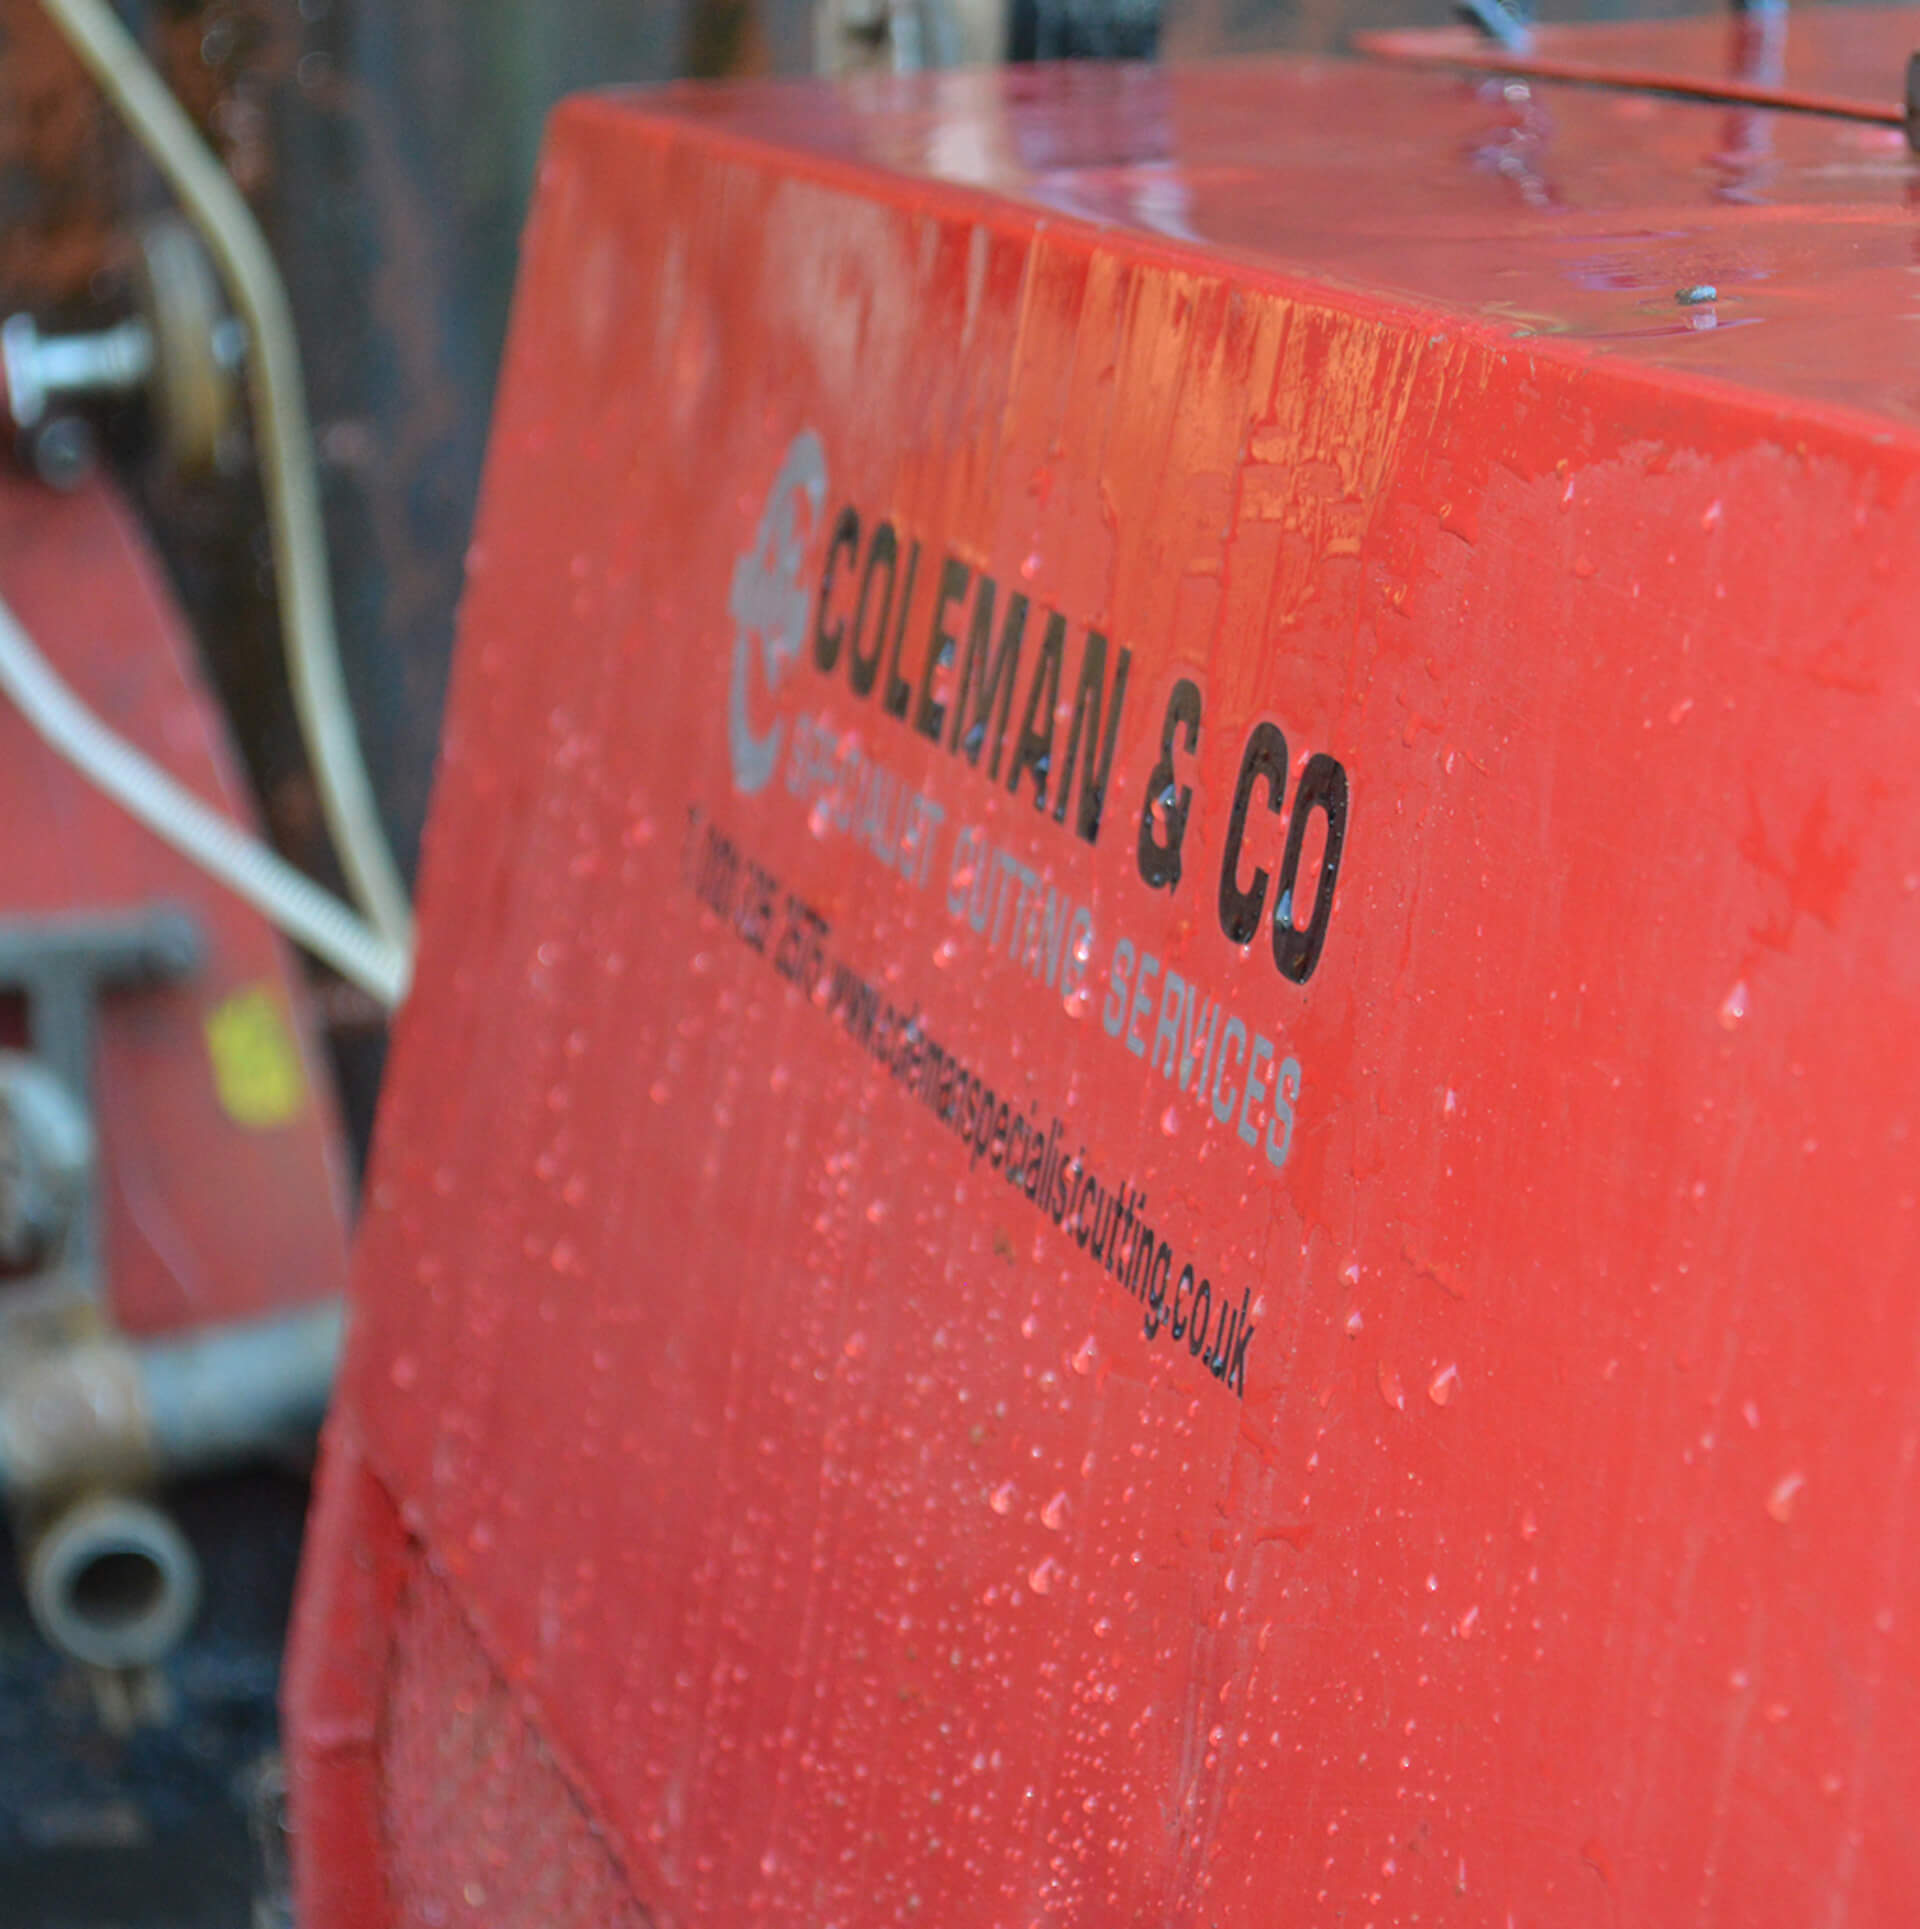 close up image of Coleman and Co branding on a red generator.